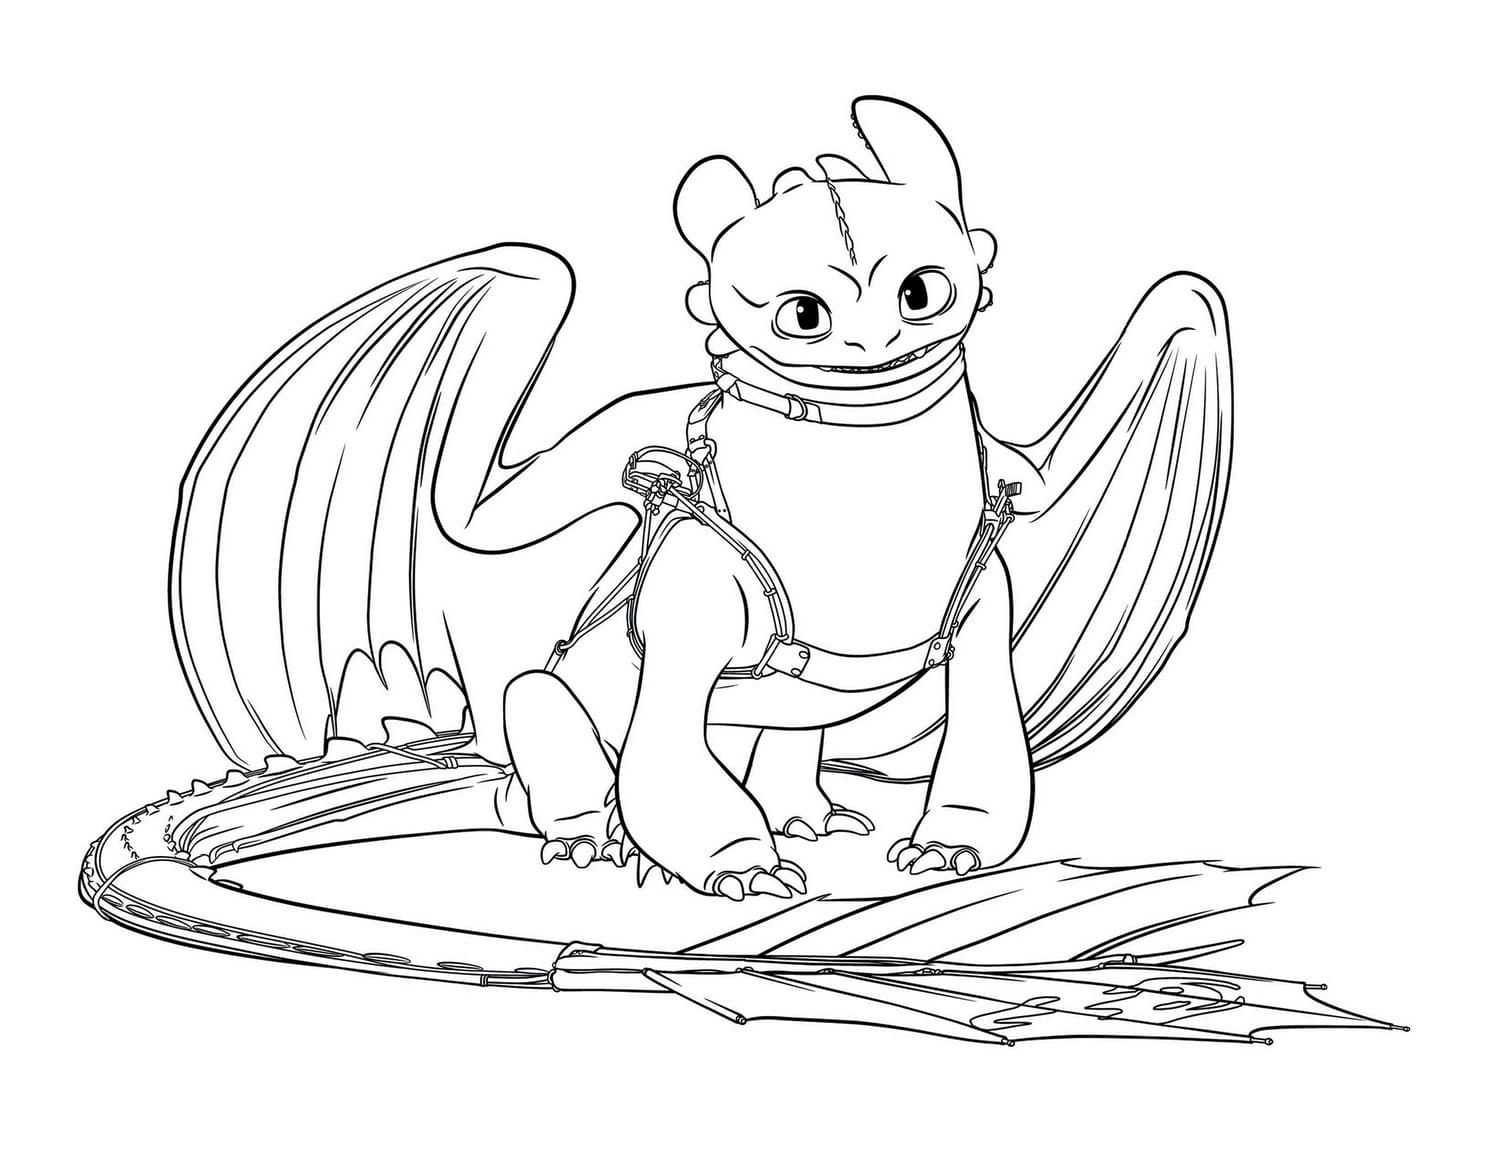 Coloring page How to Train Your Dragon 3 toothless